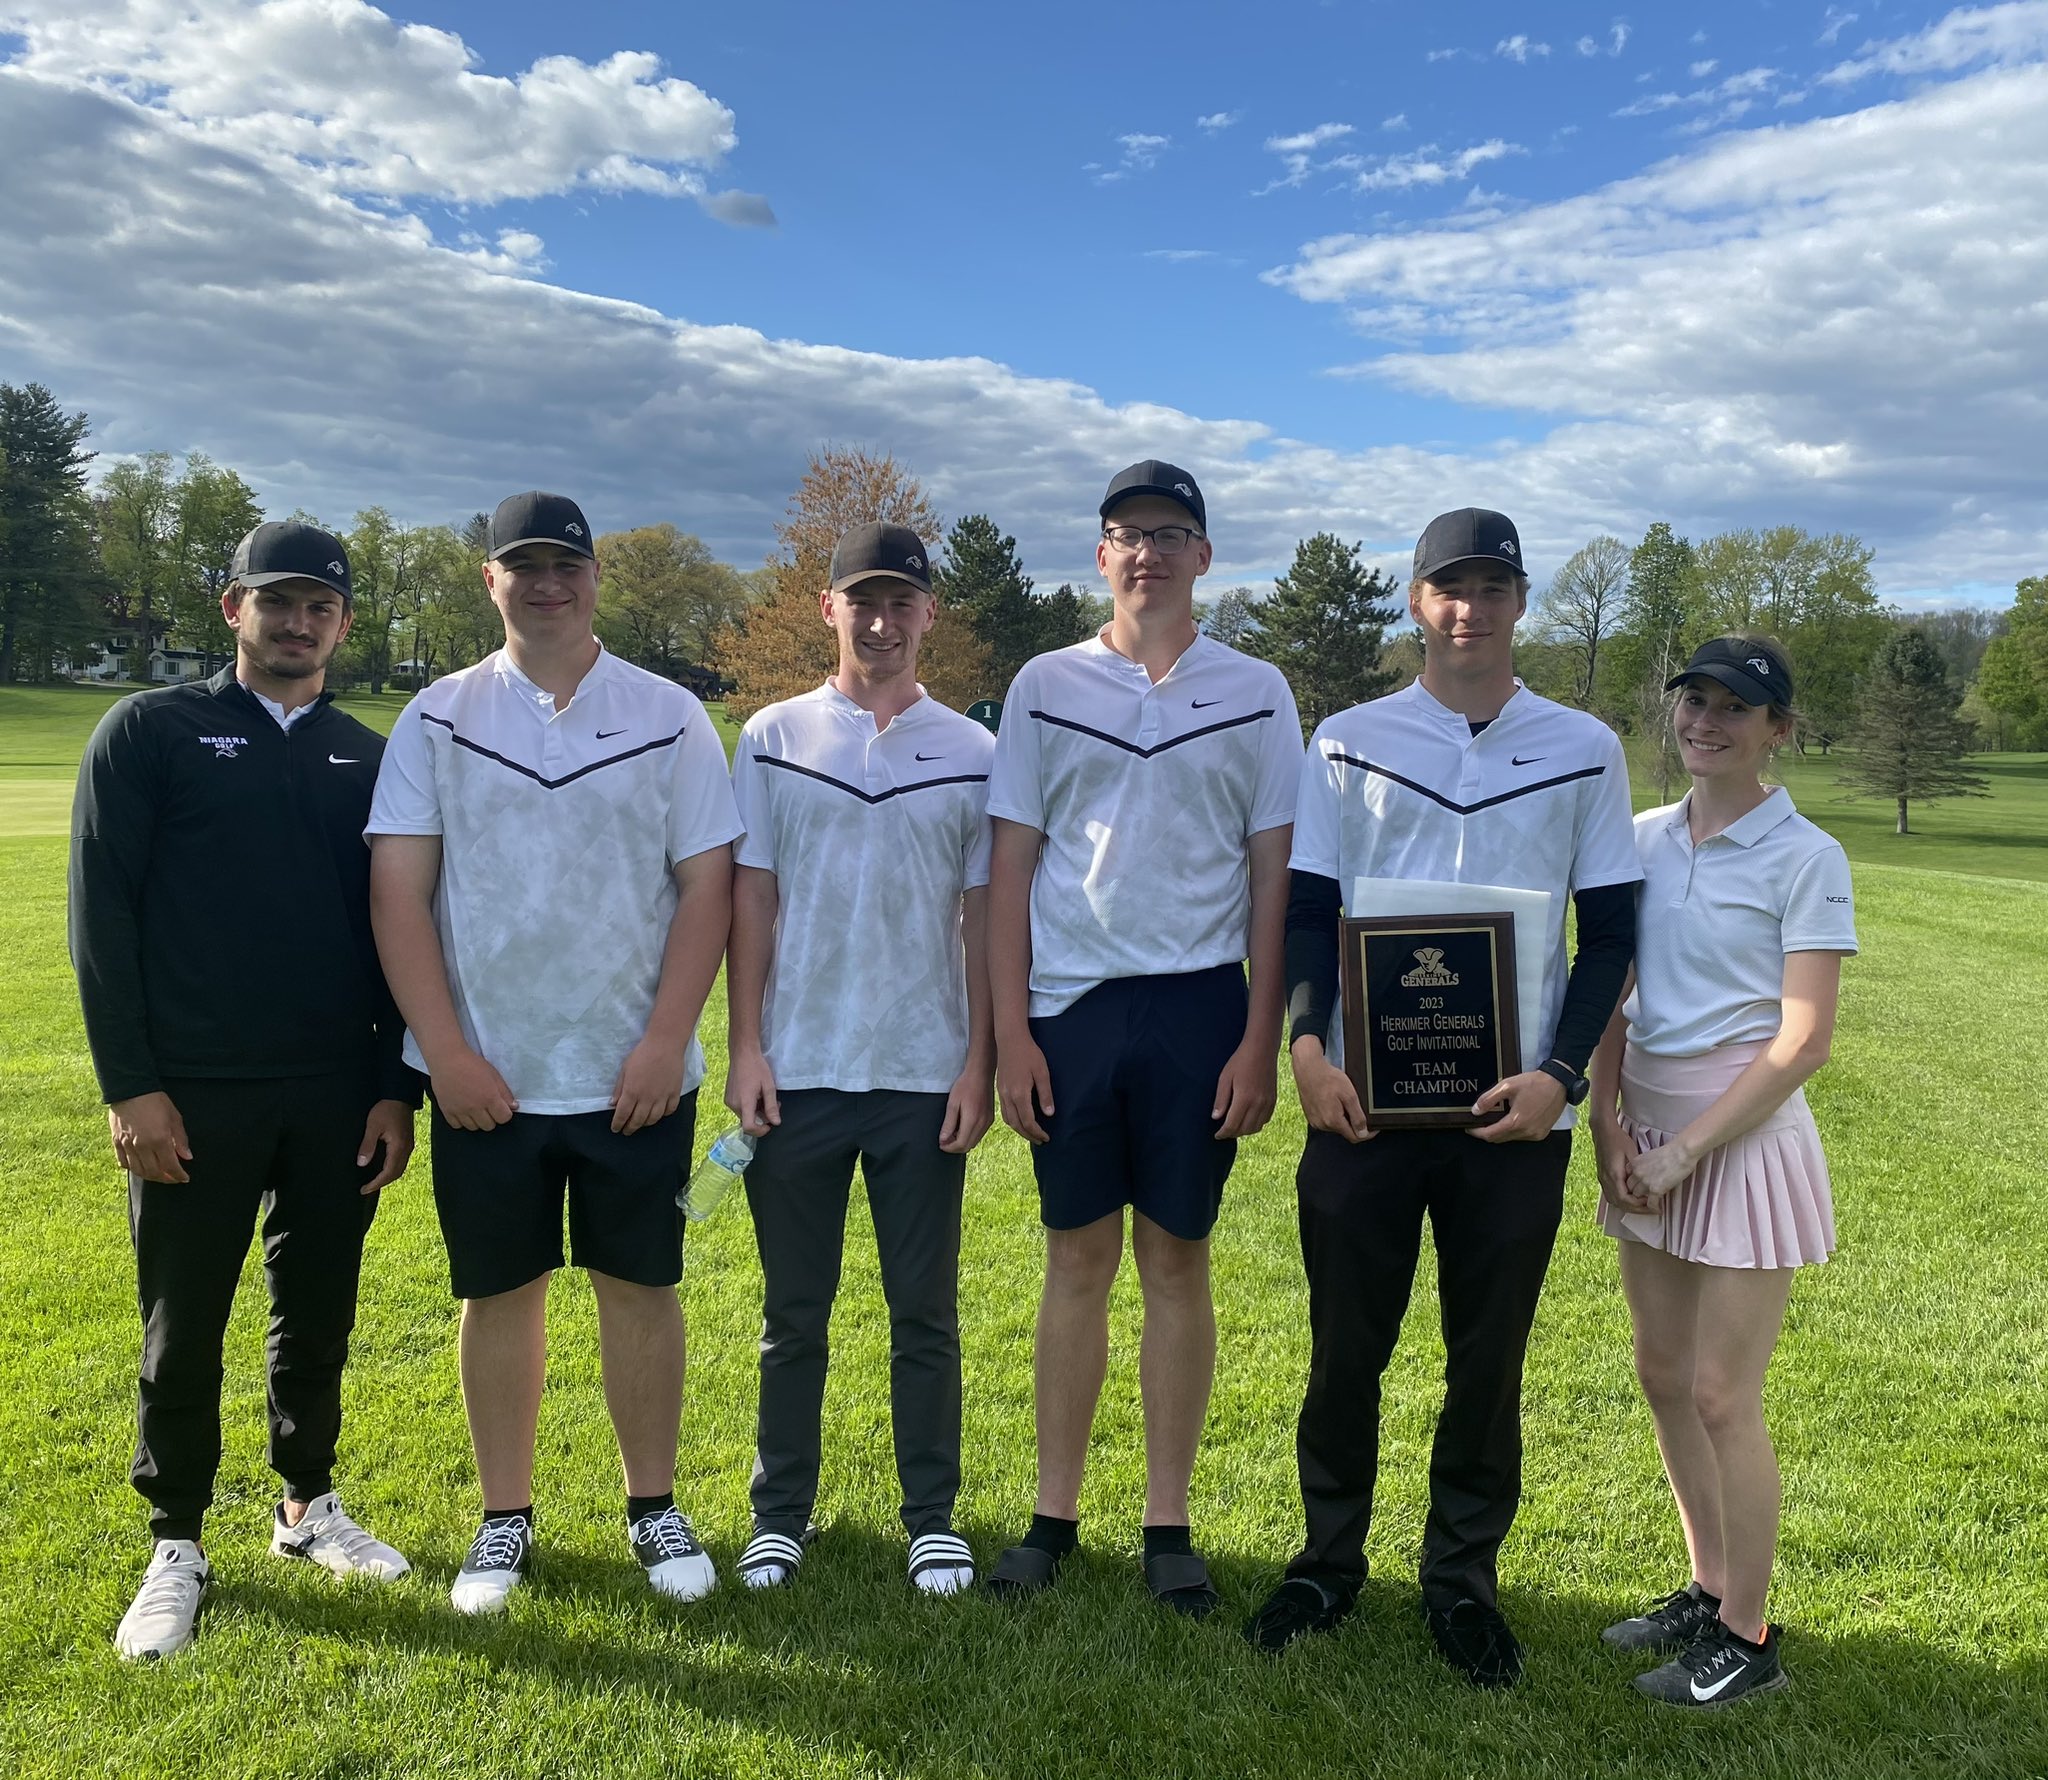 Golf wraps up regular season with another win